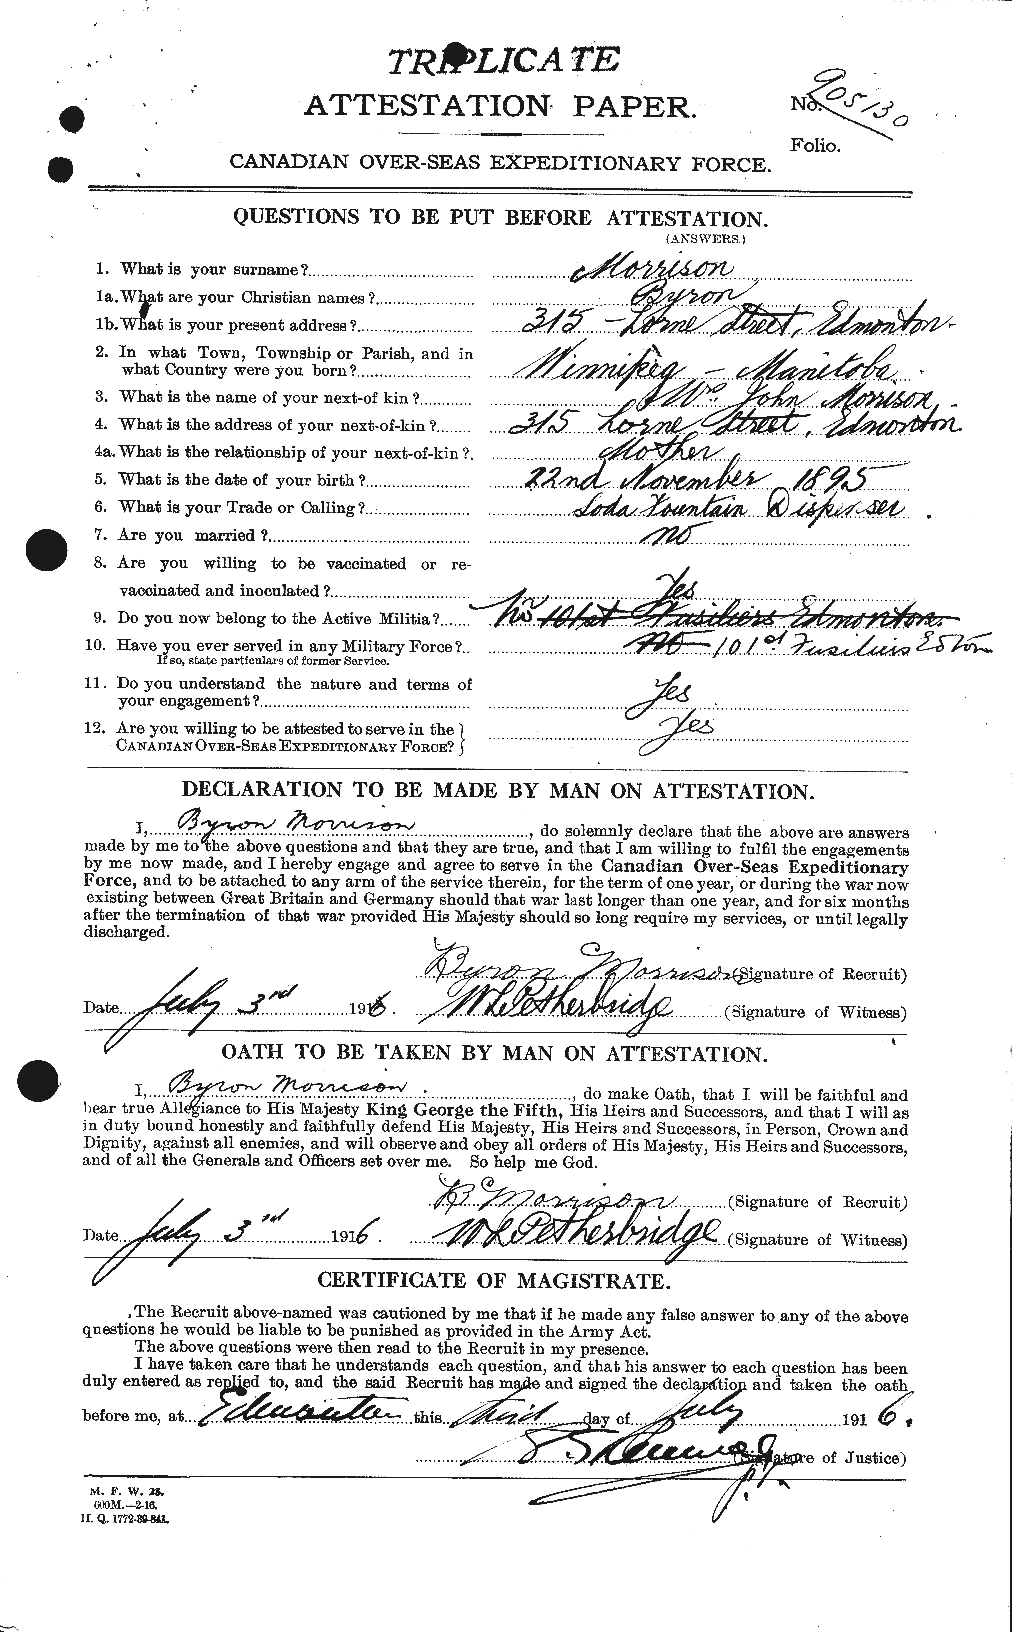 Personnel Records of the First World War - CEF 511091a